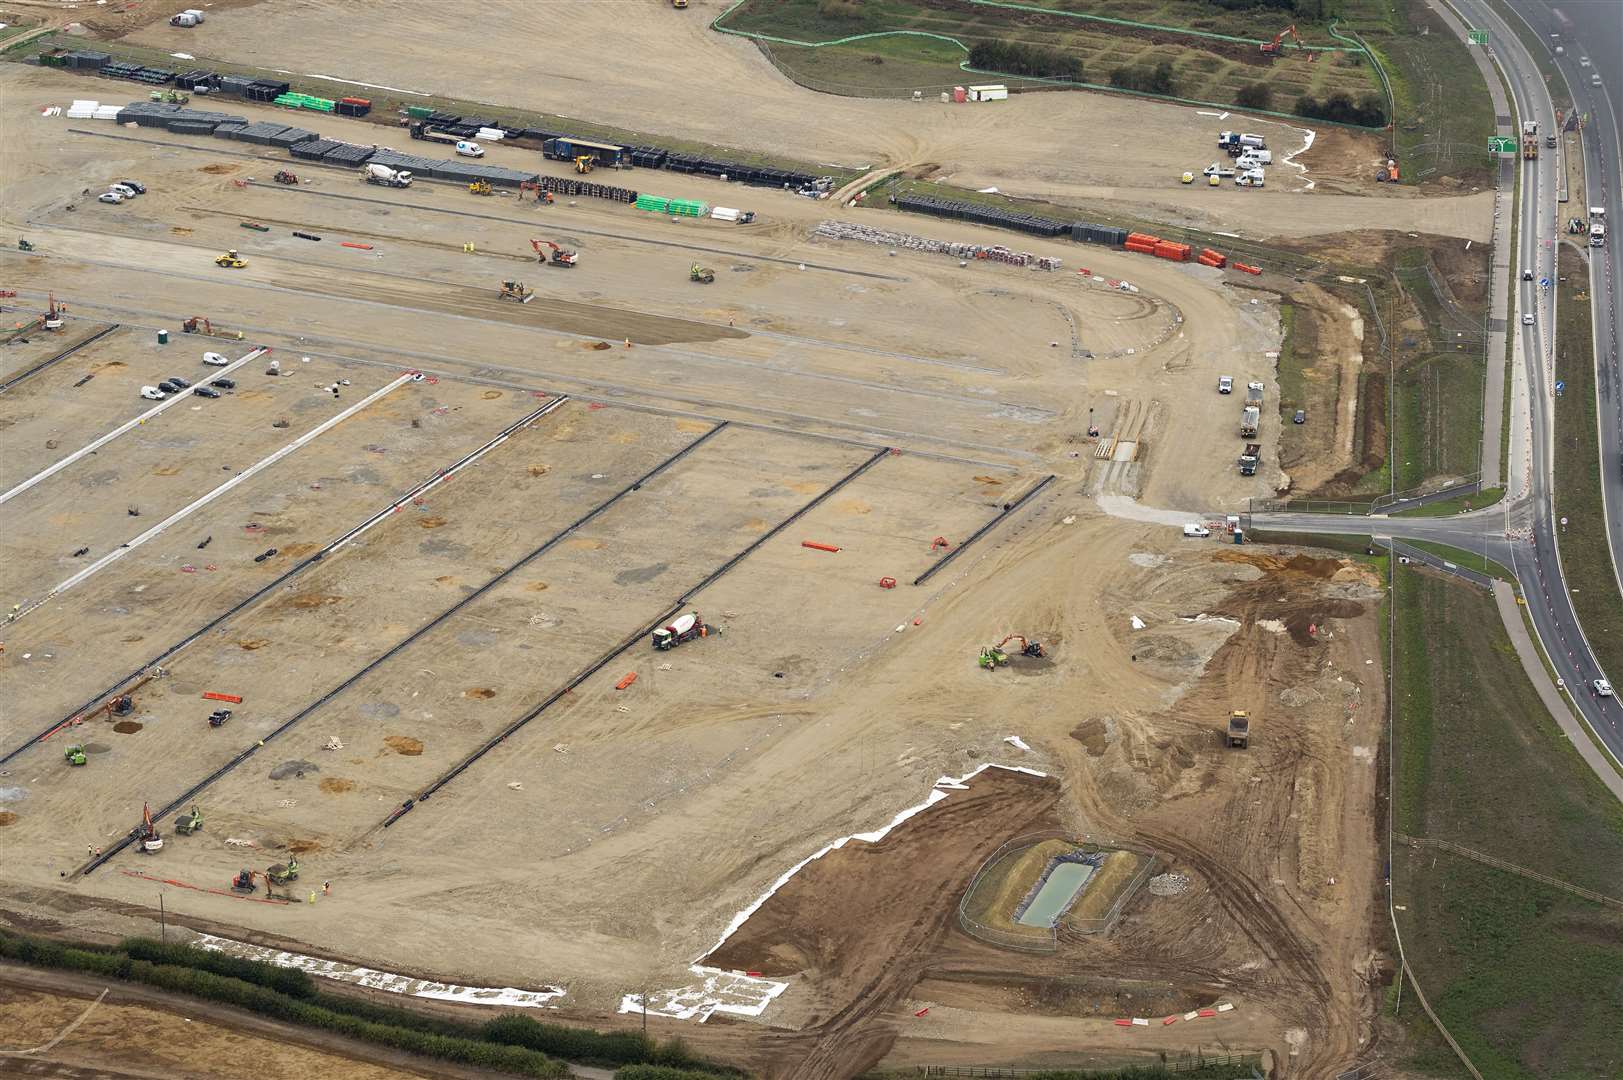 Goods could be checked at at customs sites, including Ashford (pictured) and Ebbsfleet lorry parks after the Brexit transition period ends. Stock picture